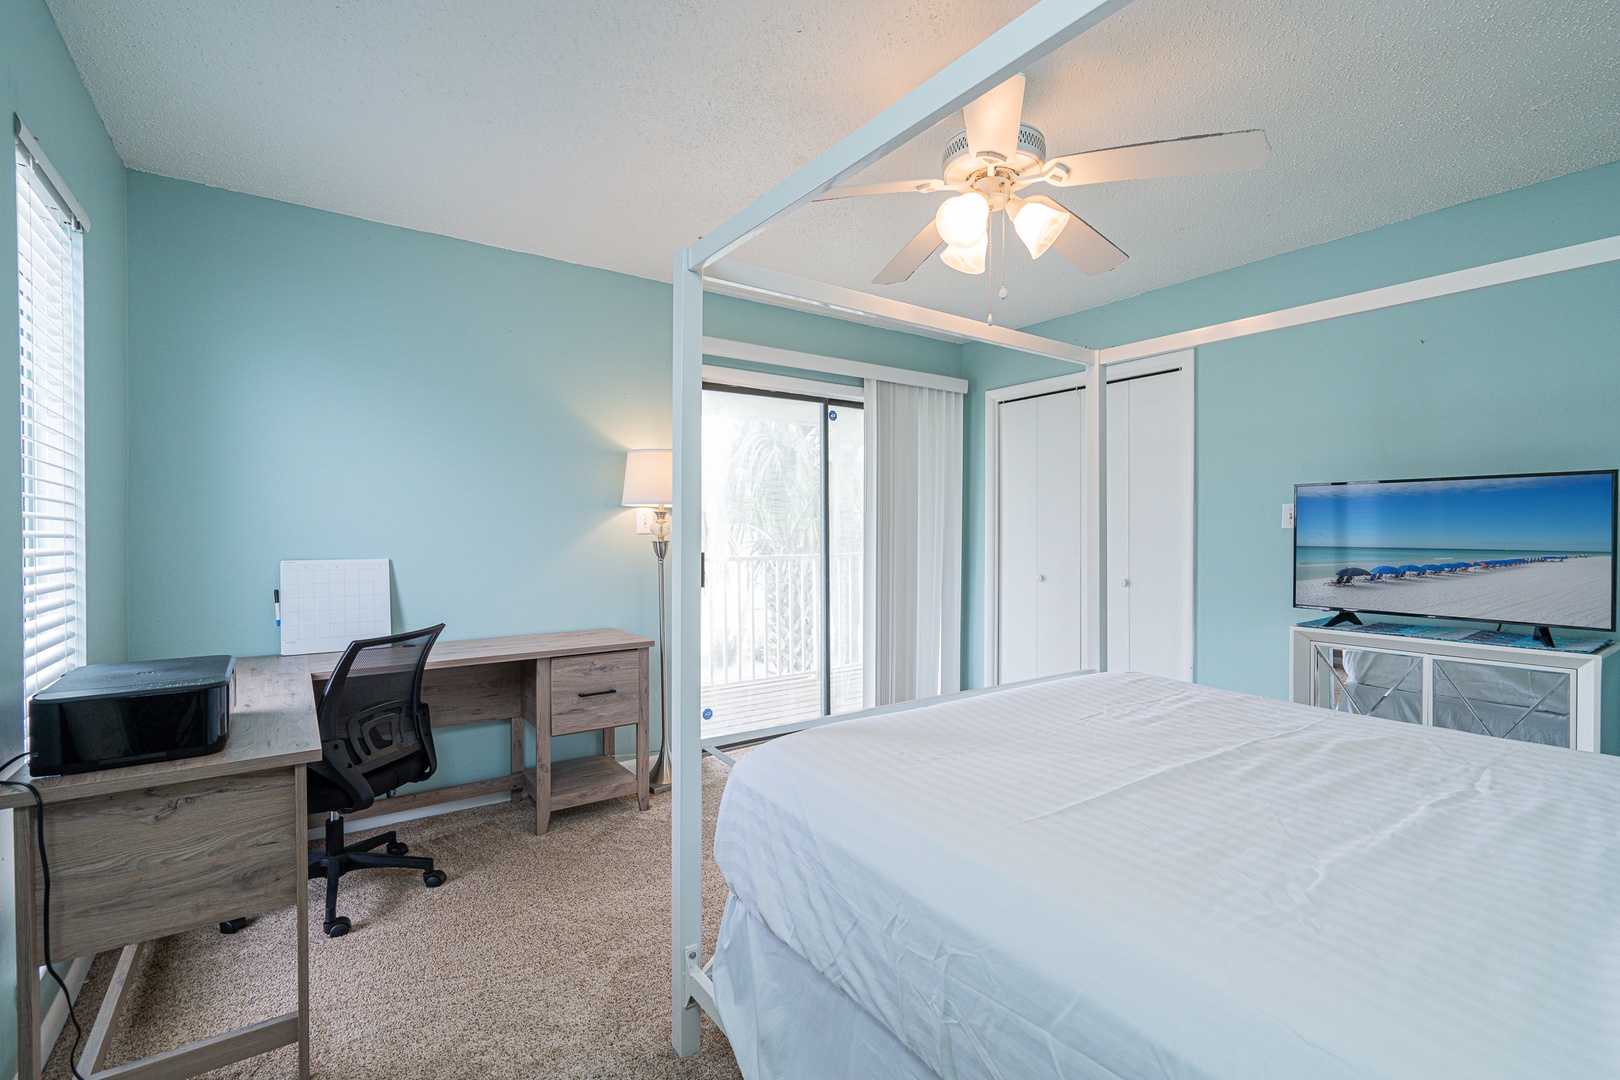 The king suite boasts a private ensuite, desk workspace, Smart TV, & balcony